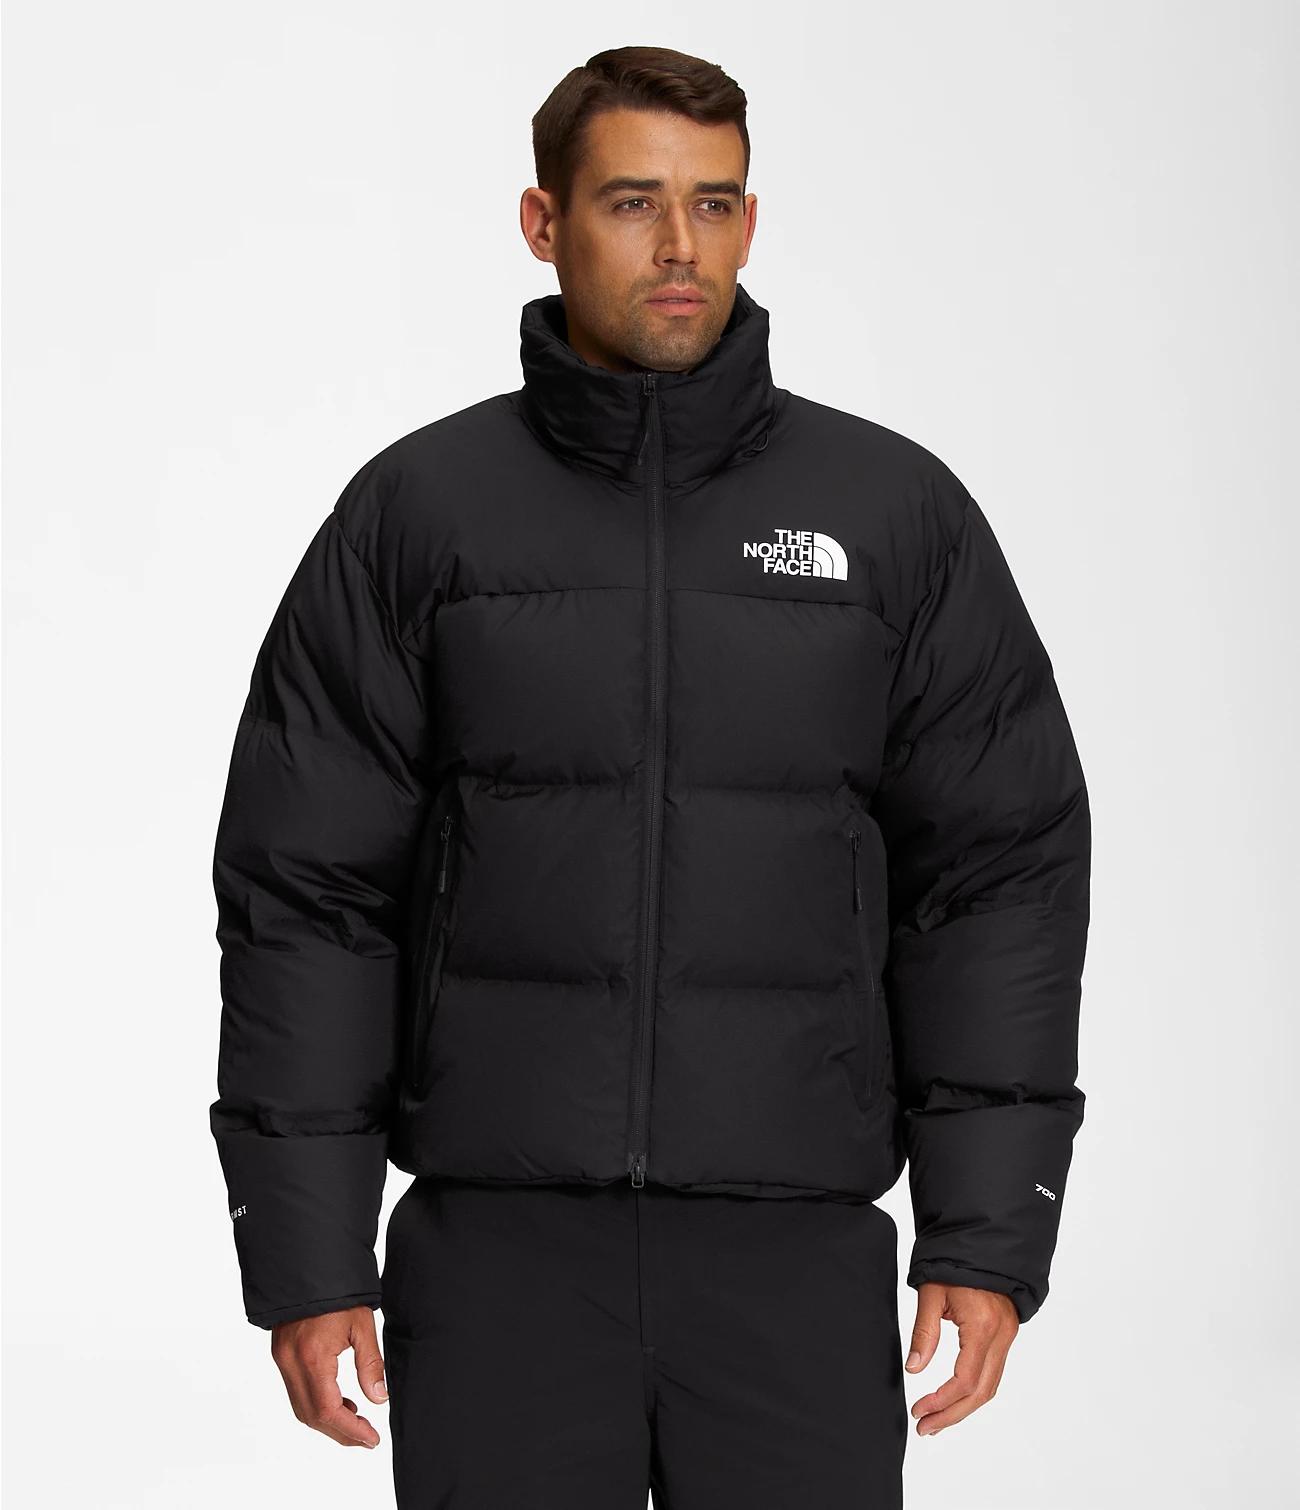 Men’s RMST Nuptse Jacket by THE NORTH FACE | jellibeans